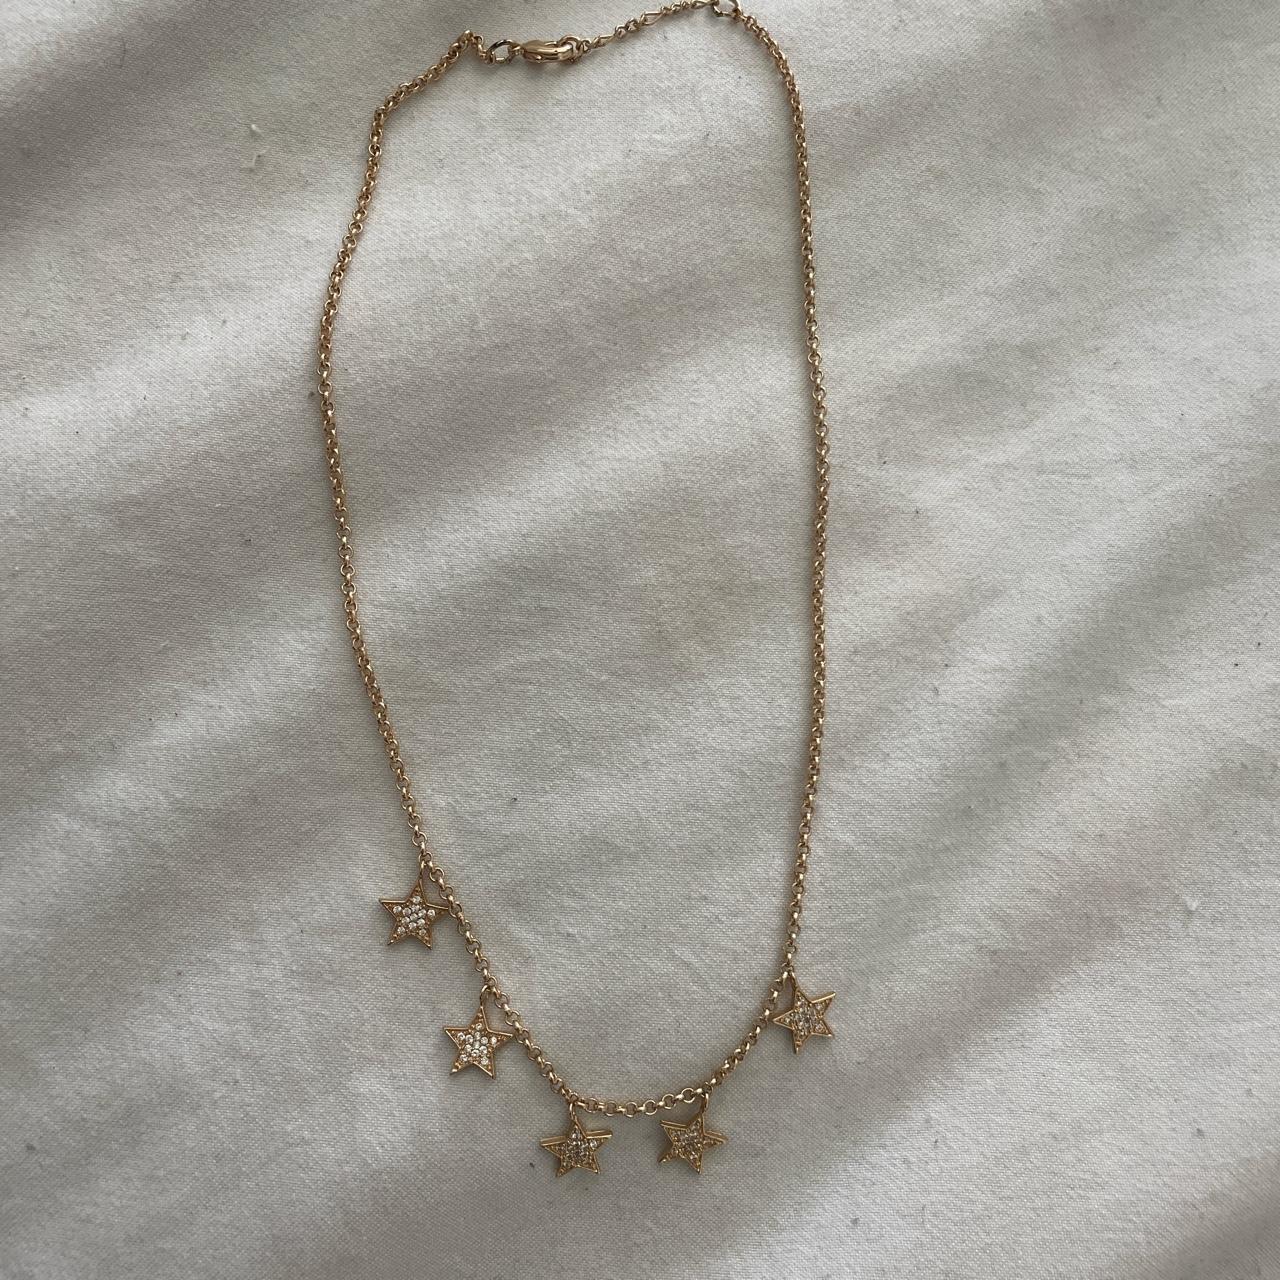 Pearl Necklace – Brandy Melville